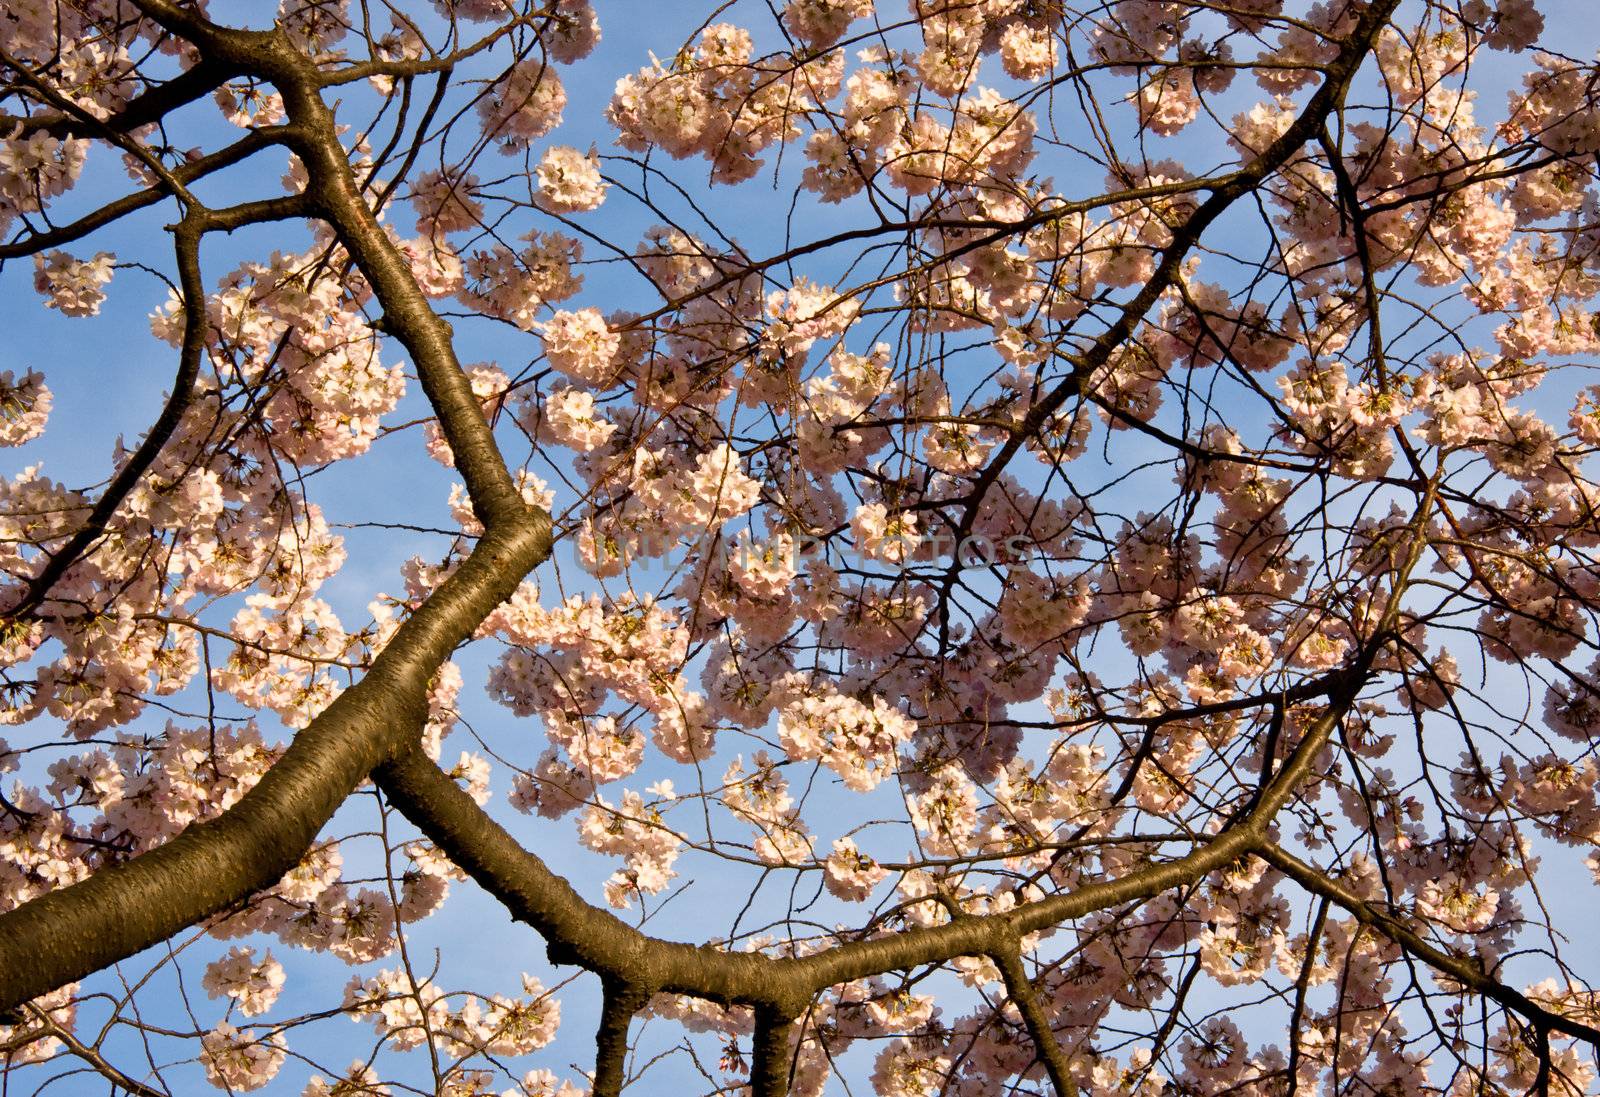 Close up of cherry blossoms with branches leading into the picture